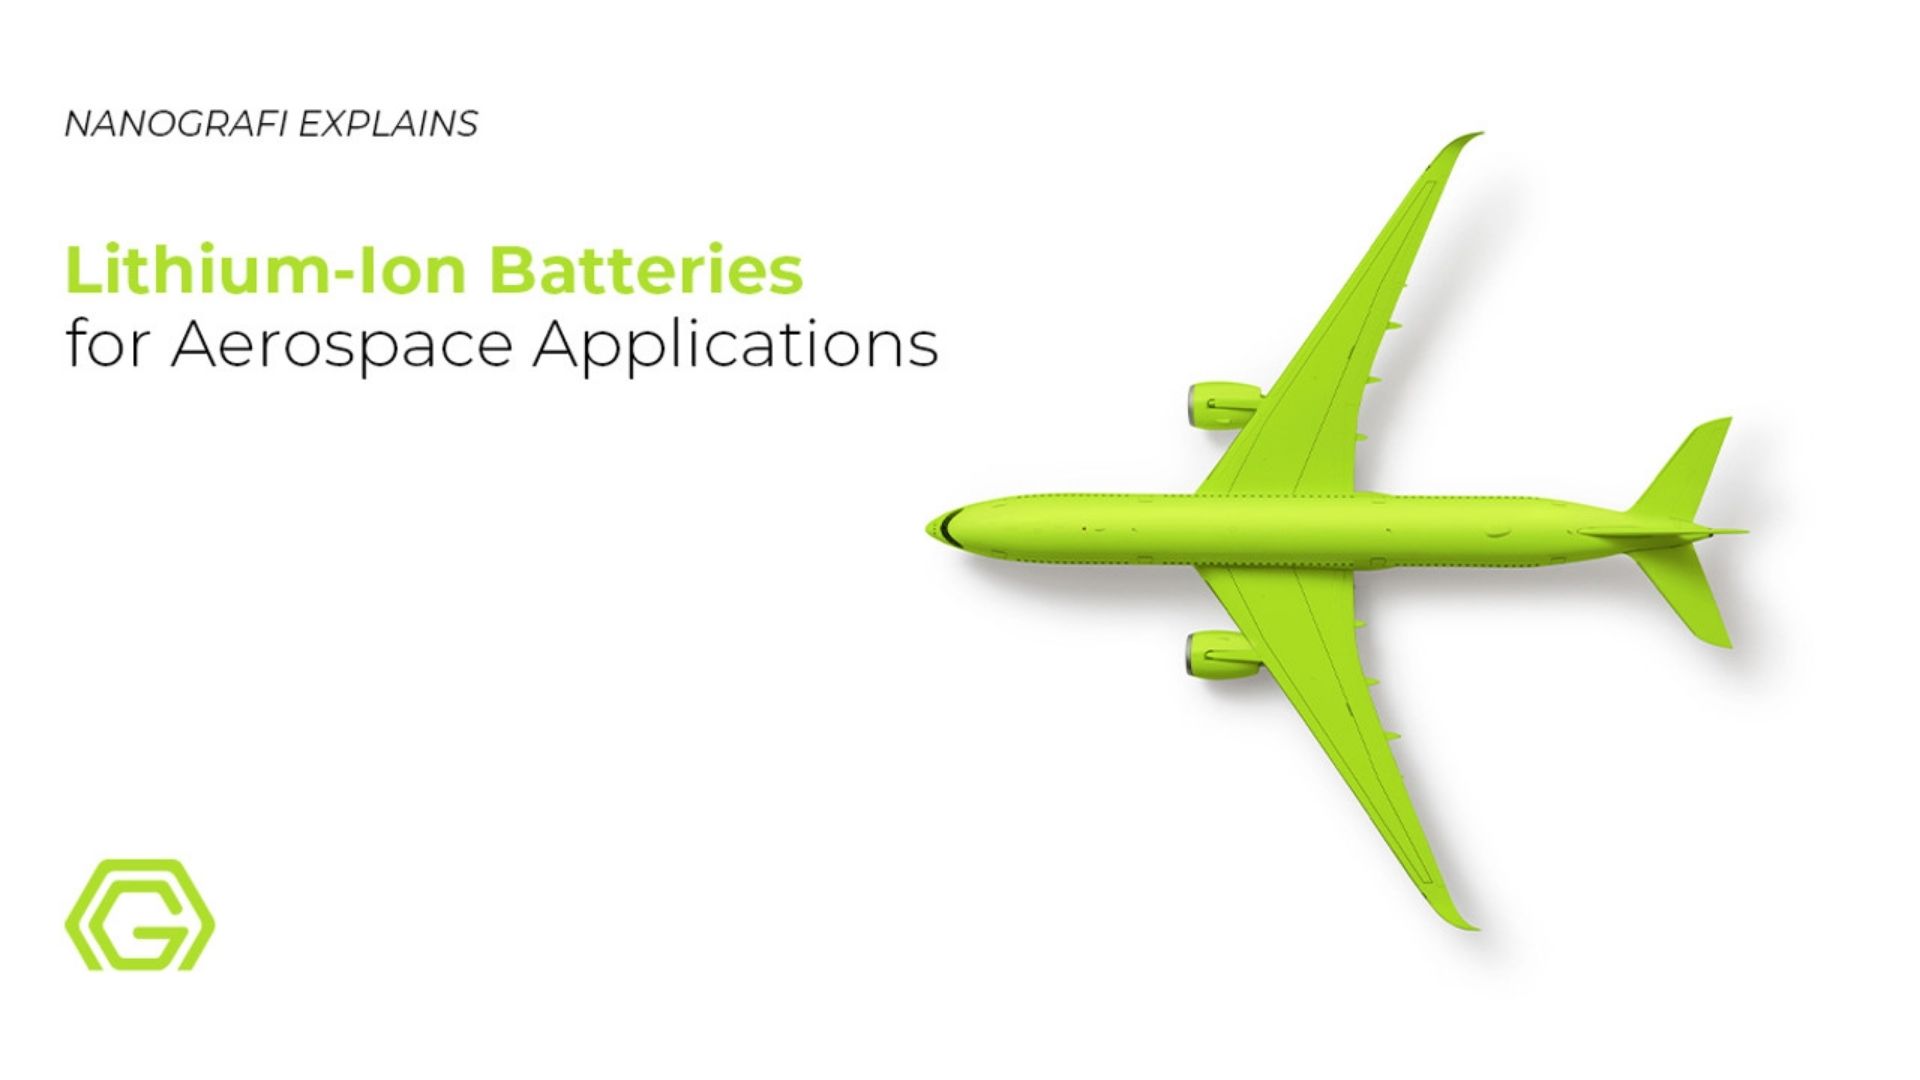 Lithium-ion batteries for aerospace applications